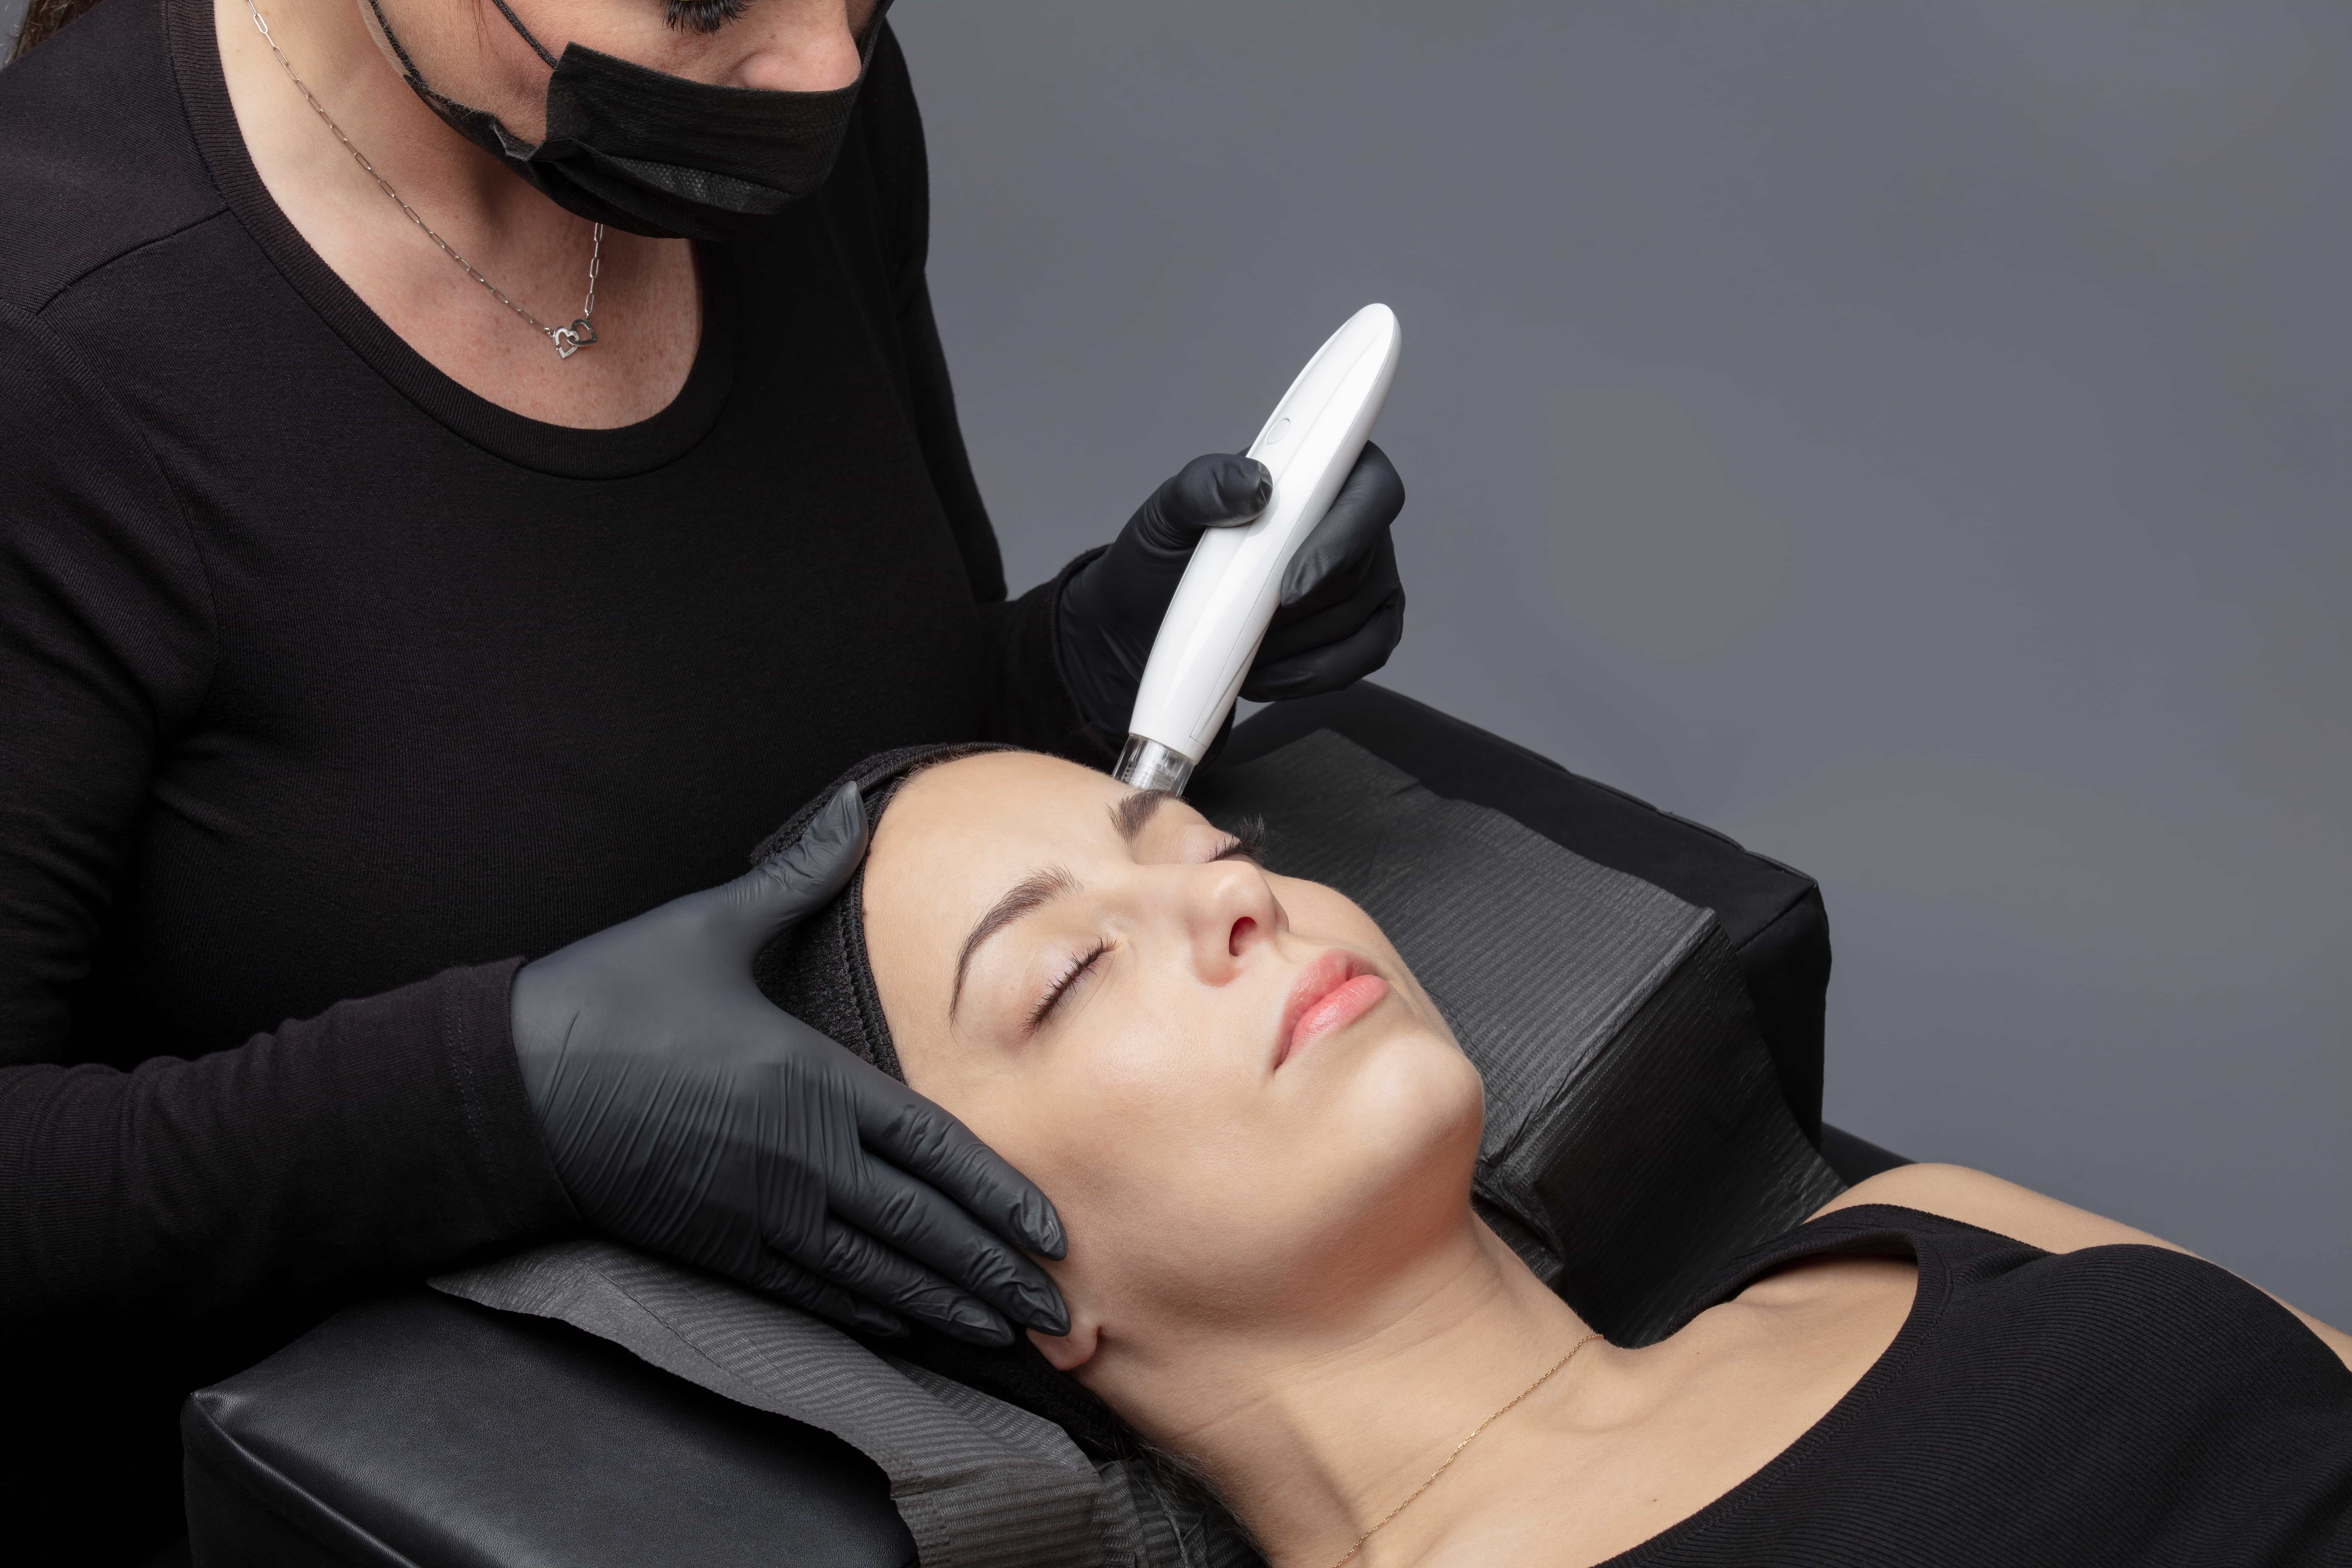 Dermaplaning The Secret to Smooth, Glowing Skin Revealed